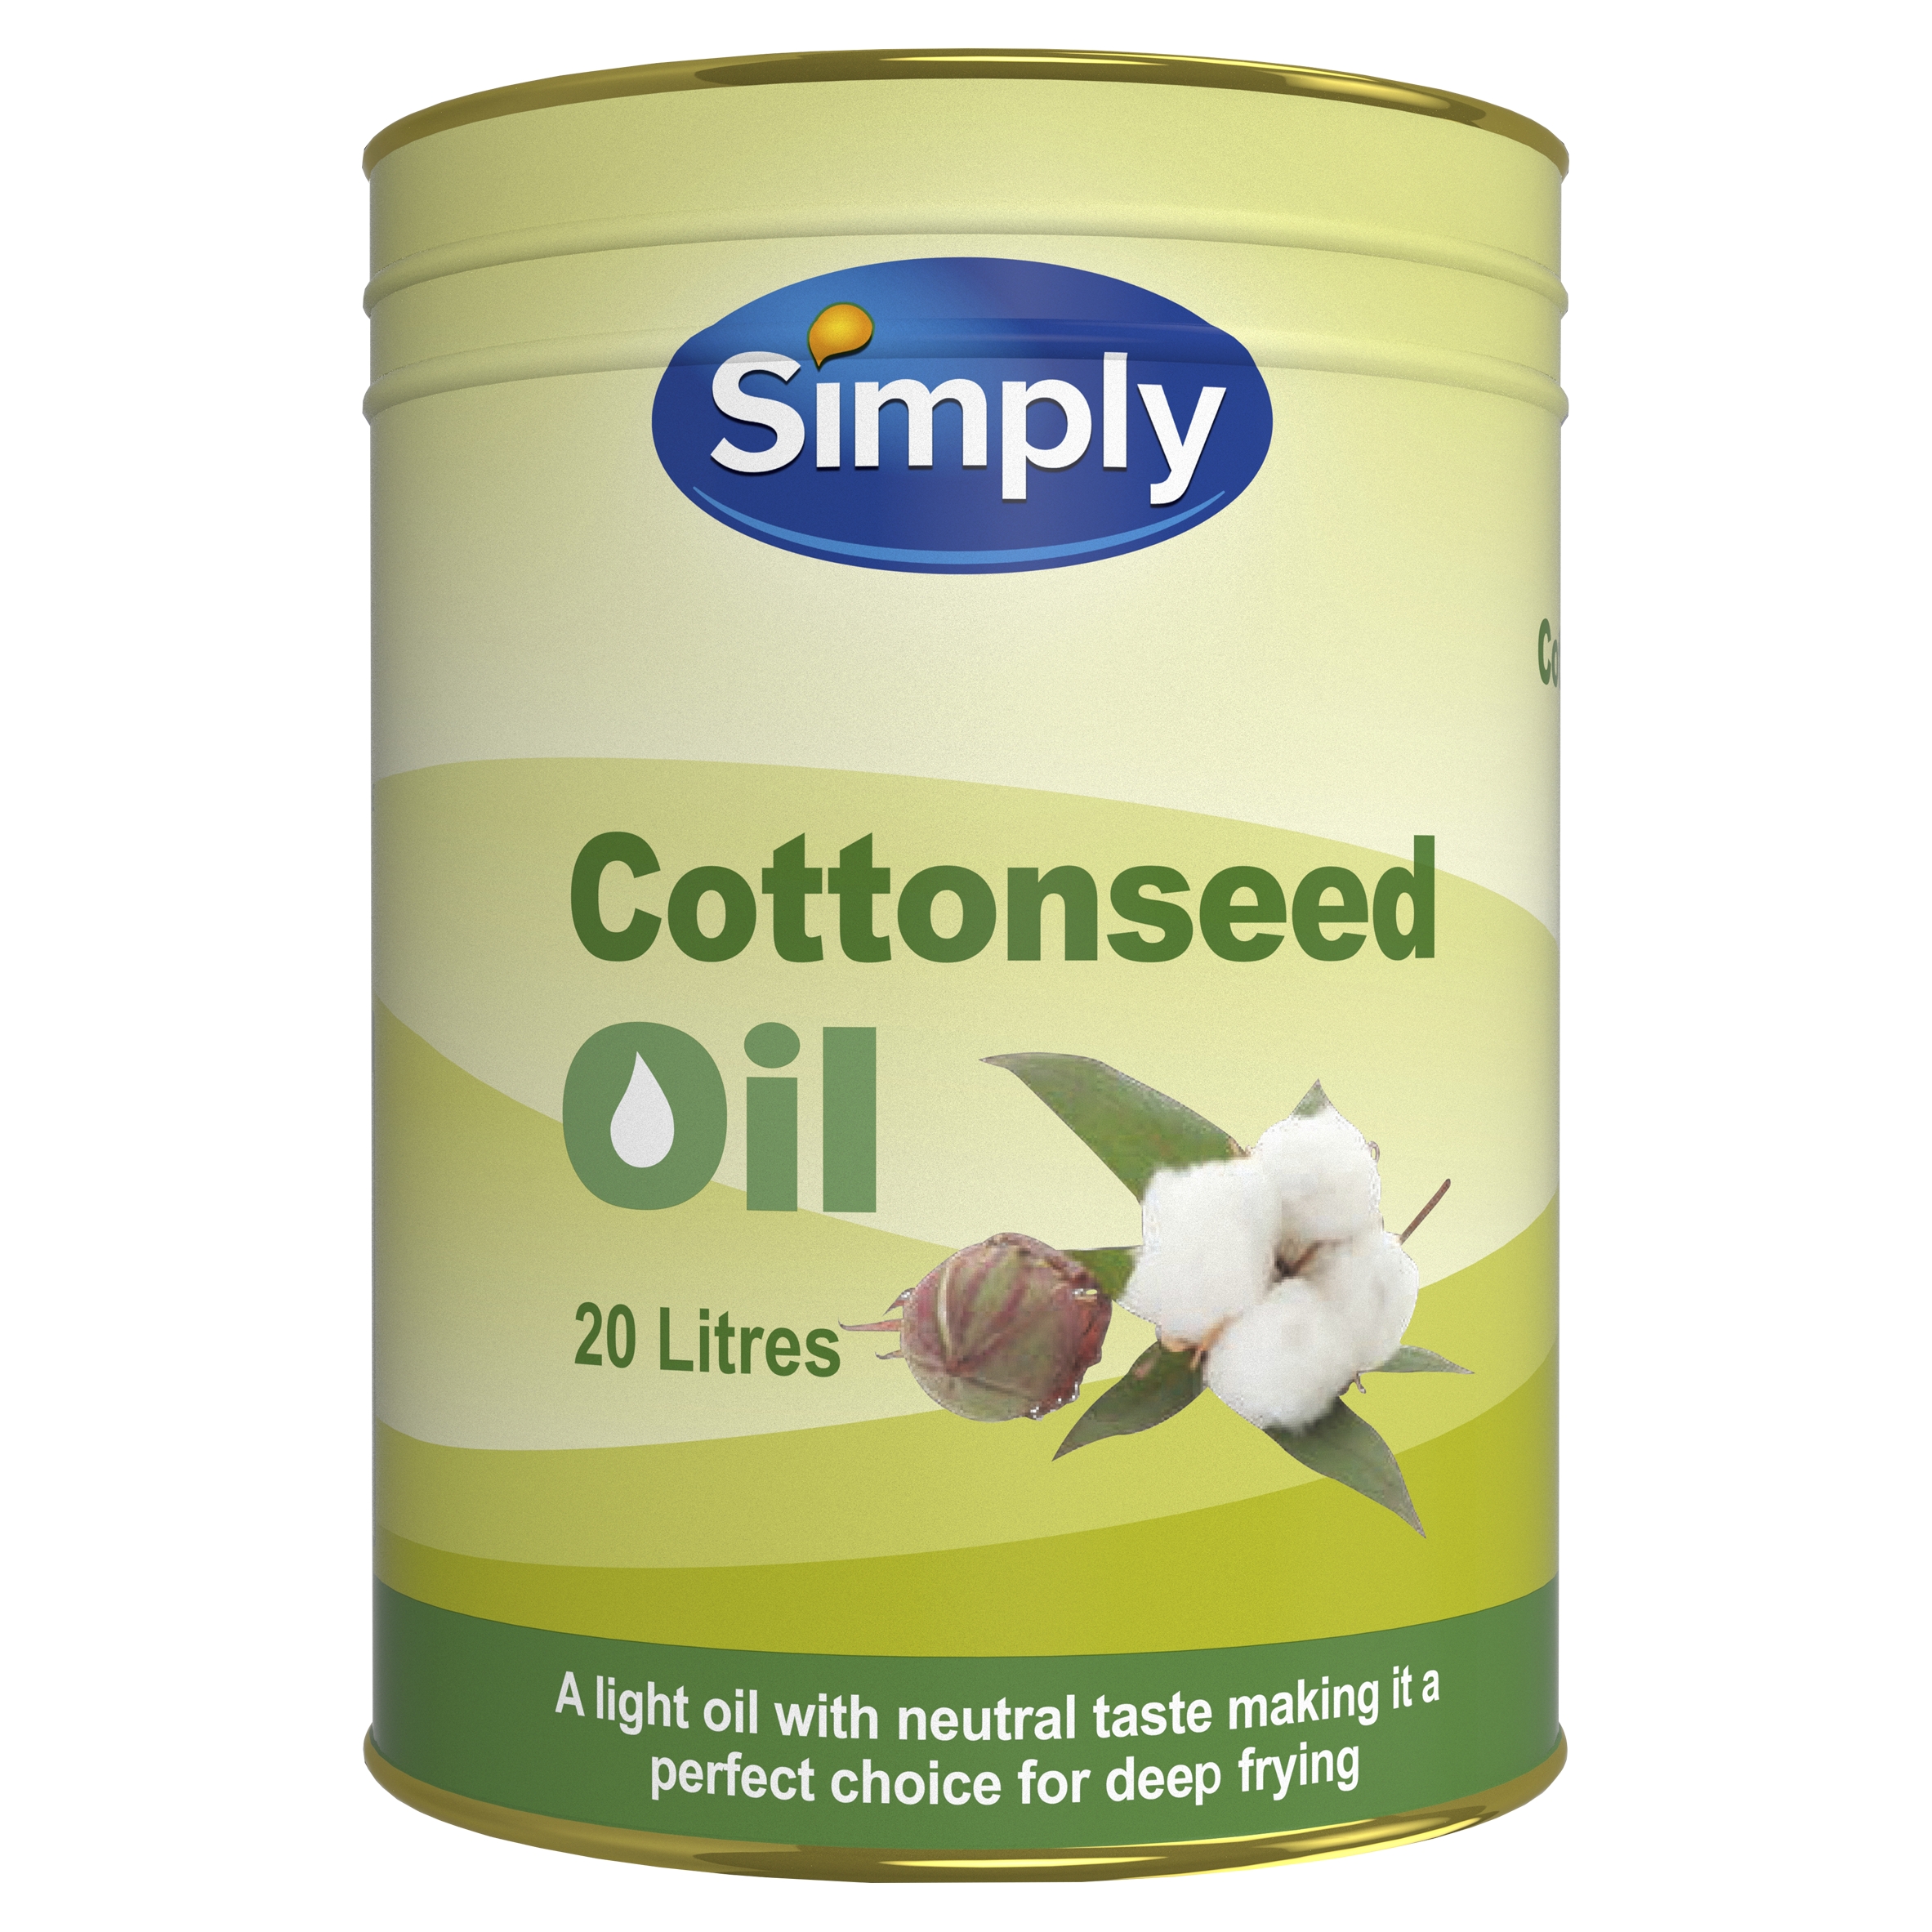 Simply Cottonseed Oil 20 Litres product photo